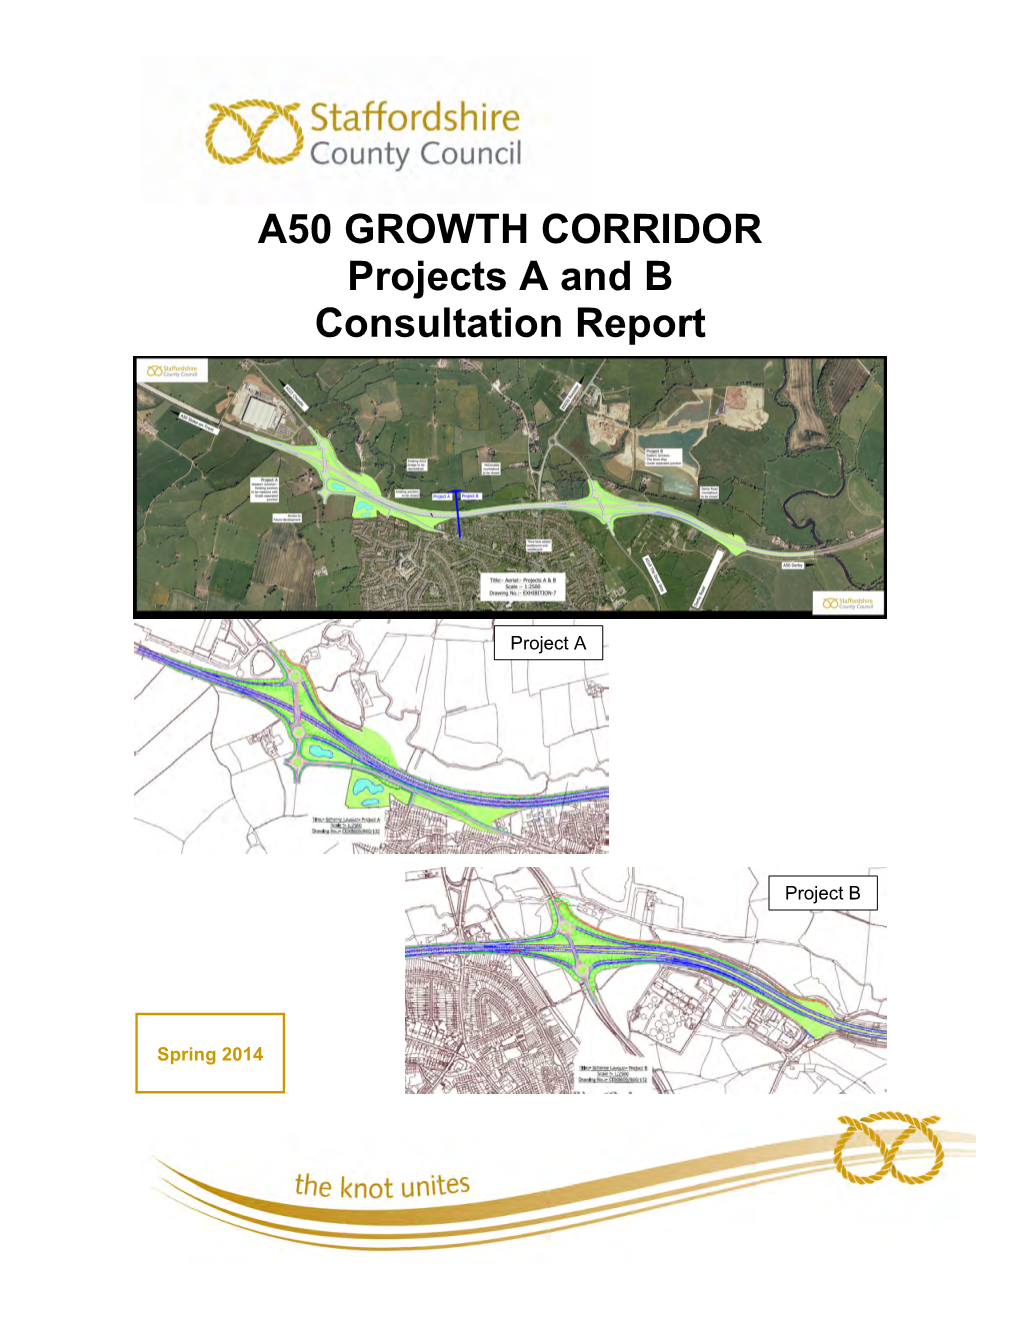 A50 GROWTH CORRIDOR Projects a and B Consultation Report